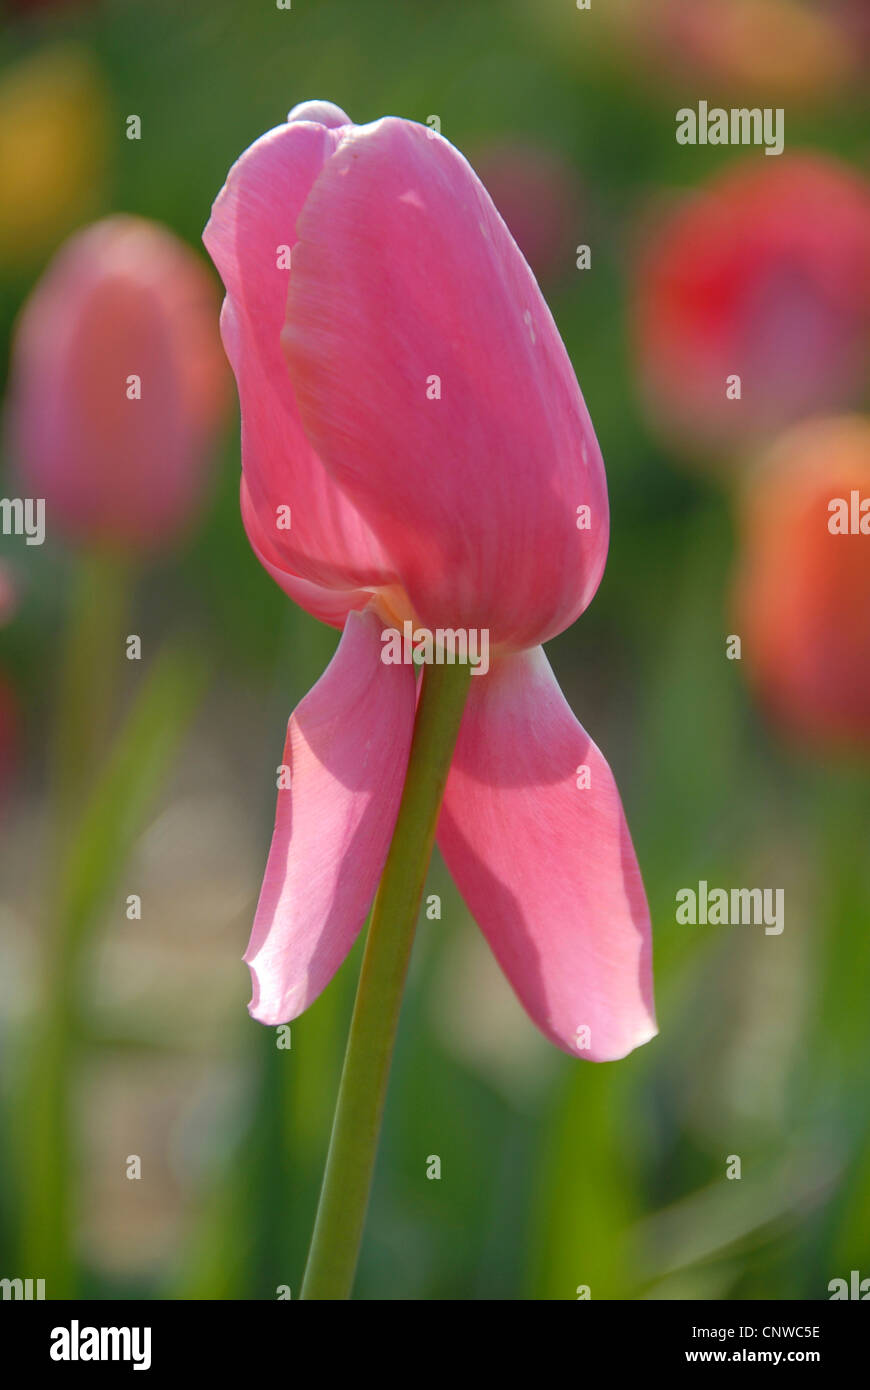 common garden tulip (Tulipa gesneriana), tulip with two petals pointing downwards Stock Photo